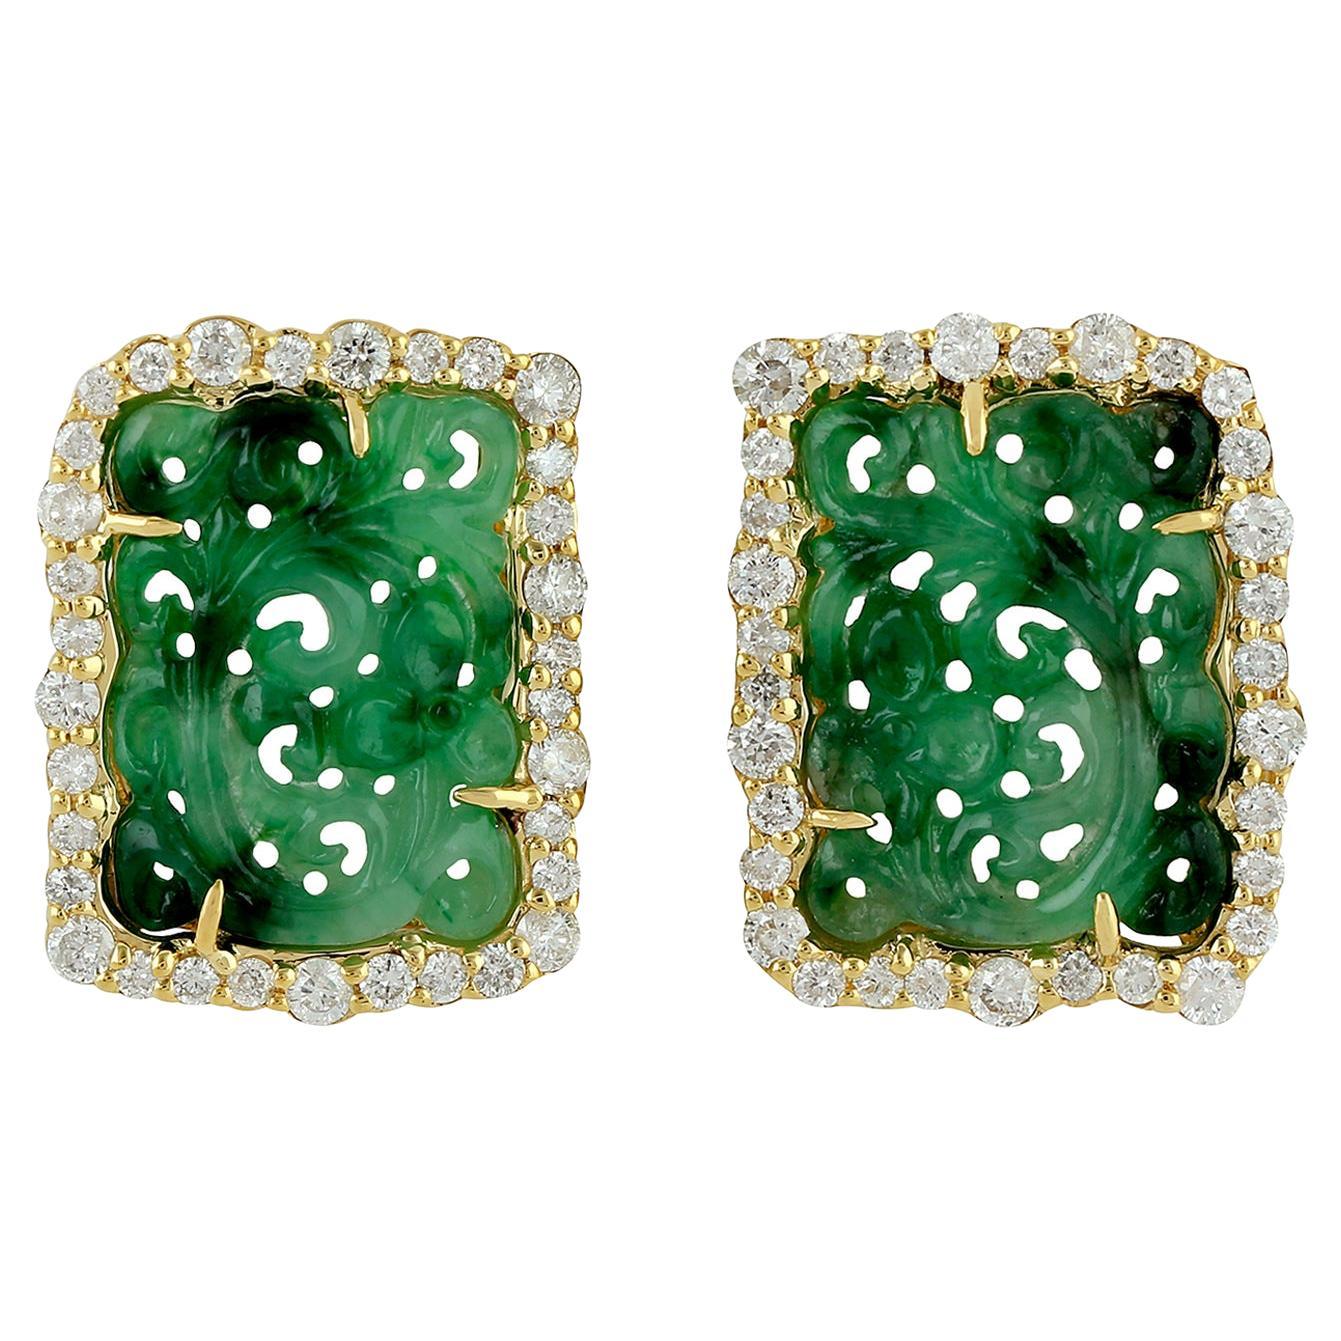 Carved Jade Stud Earrings With Diamonds All Around Made In 18k Yellow Gold For Sale